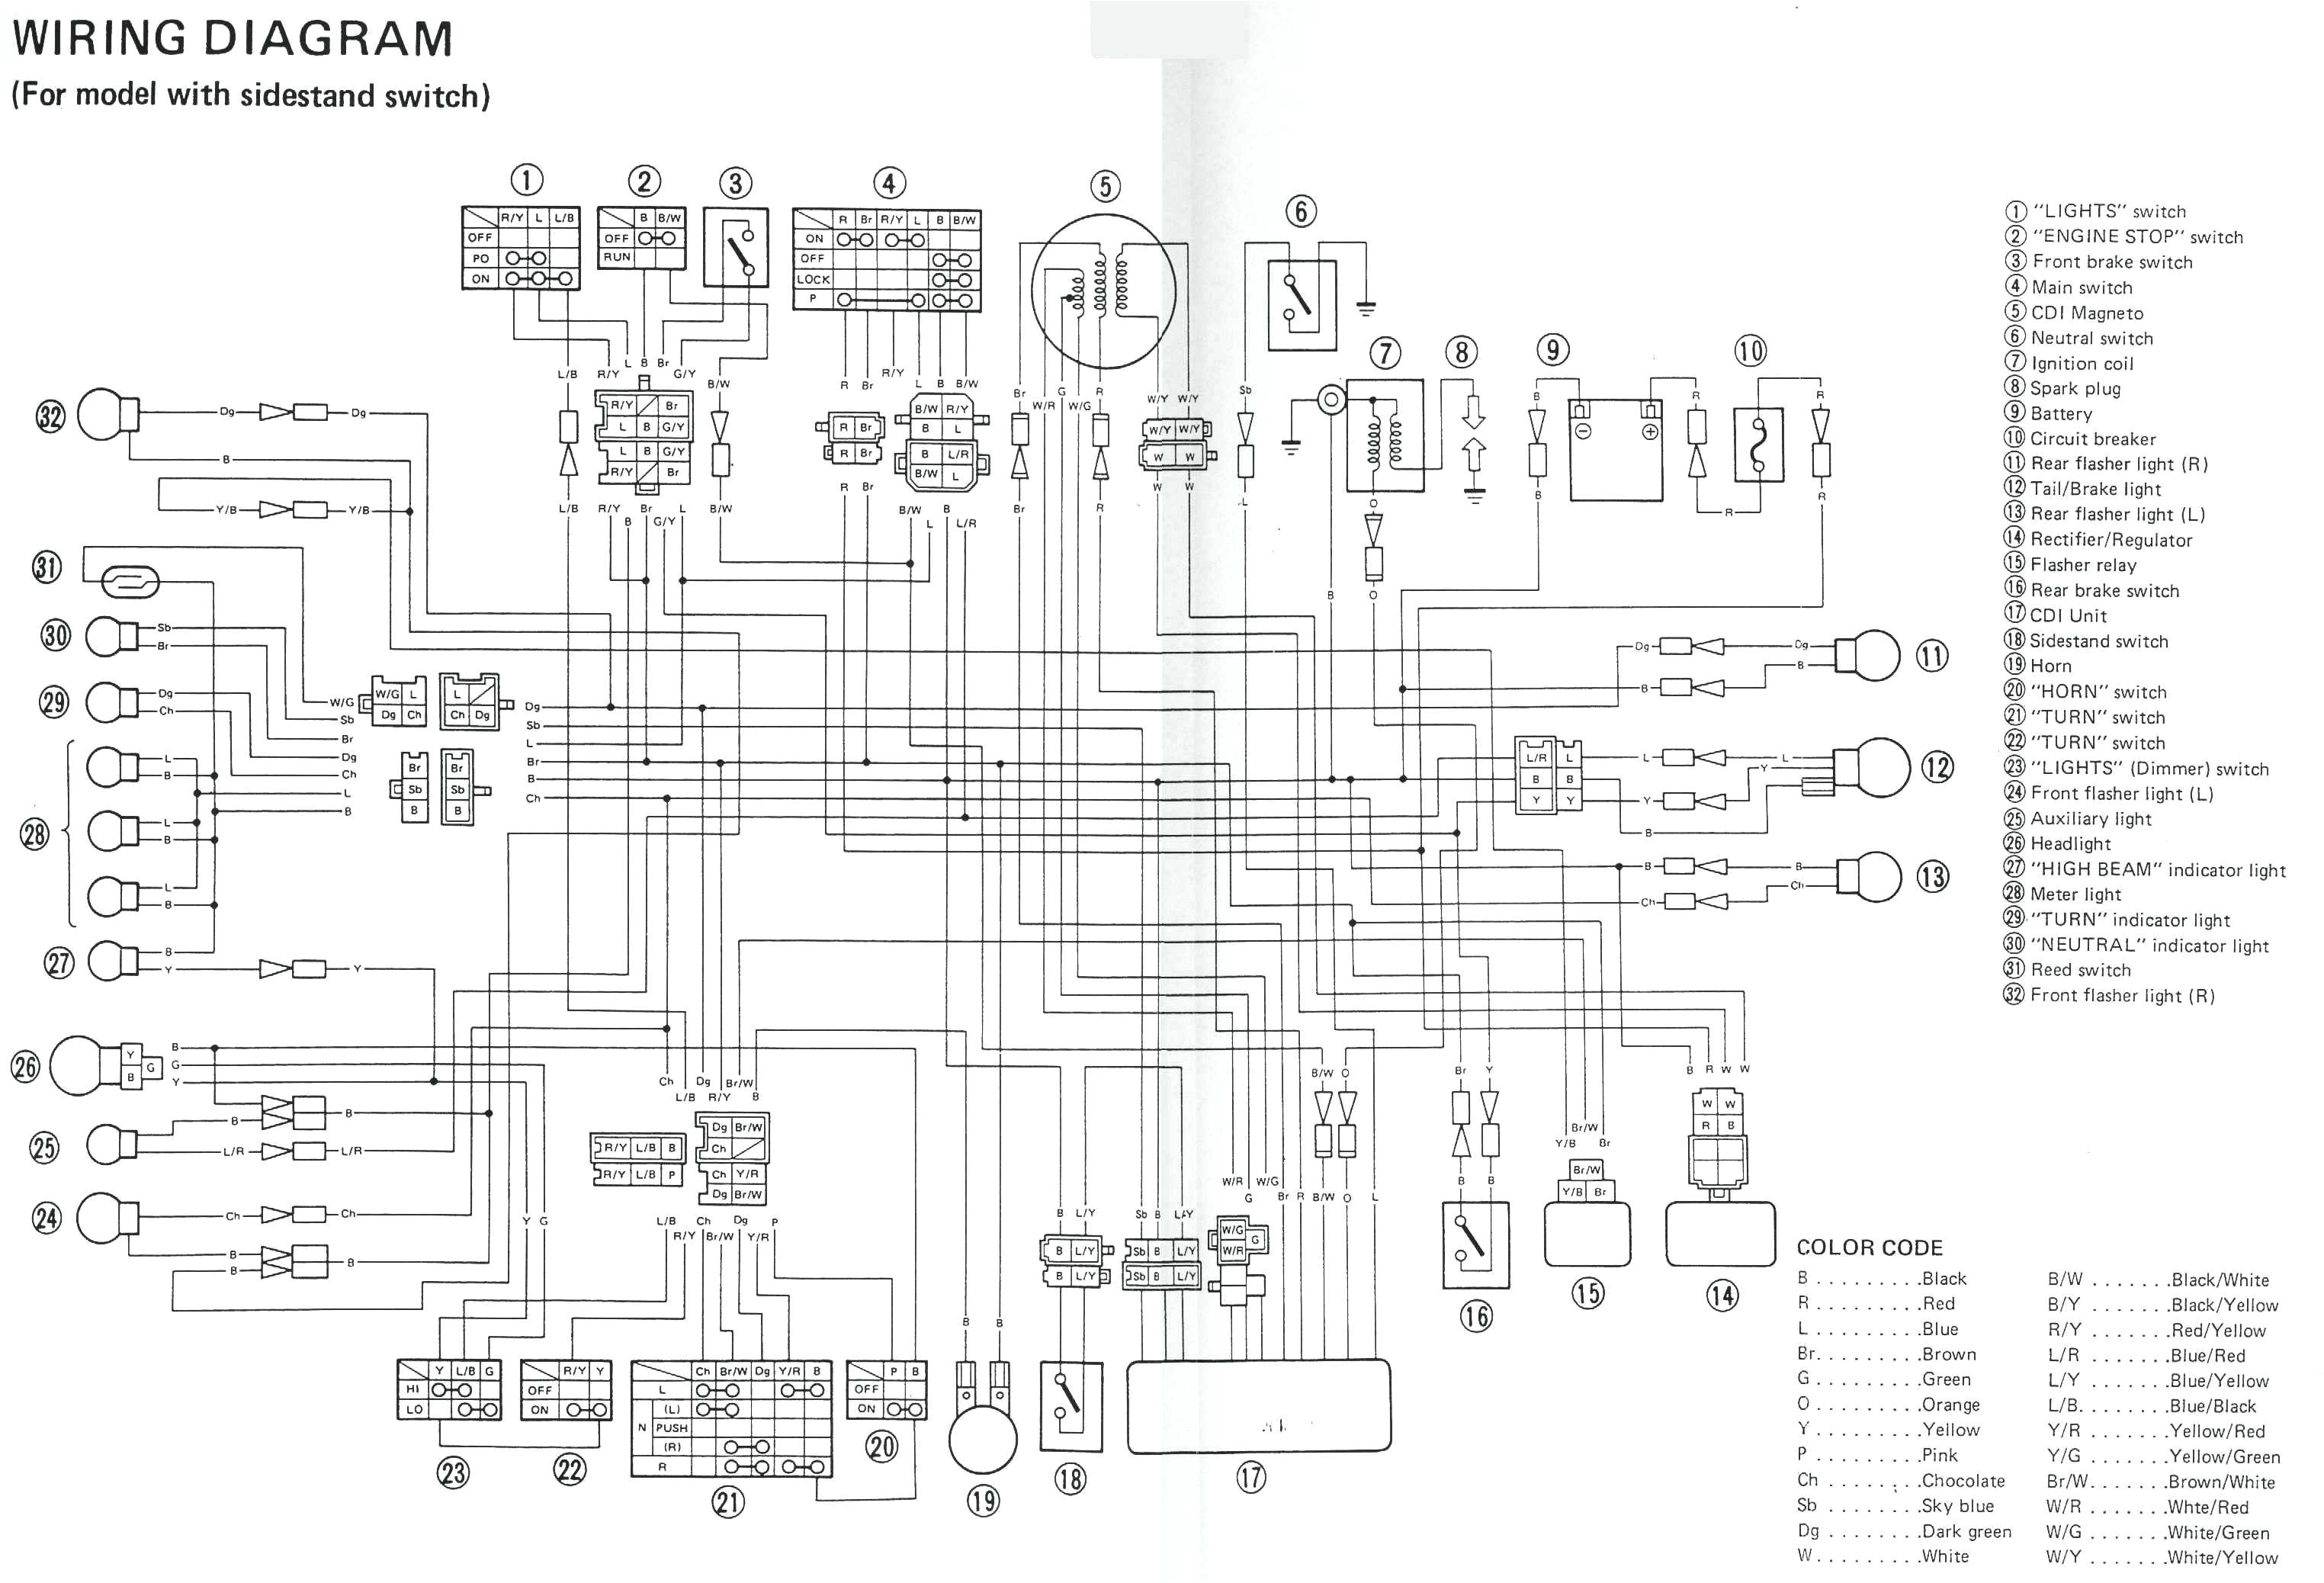 yamaha 703 remote control wiring diagram relay in addition yamaha wiring diagram yamaha tach wiring dolphin gauges wiring diagram download 3f jpg